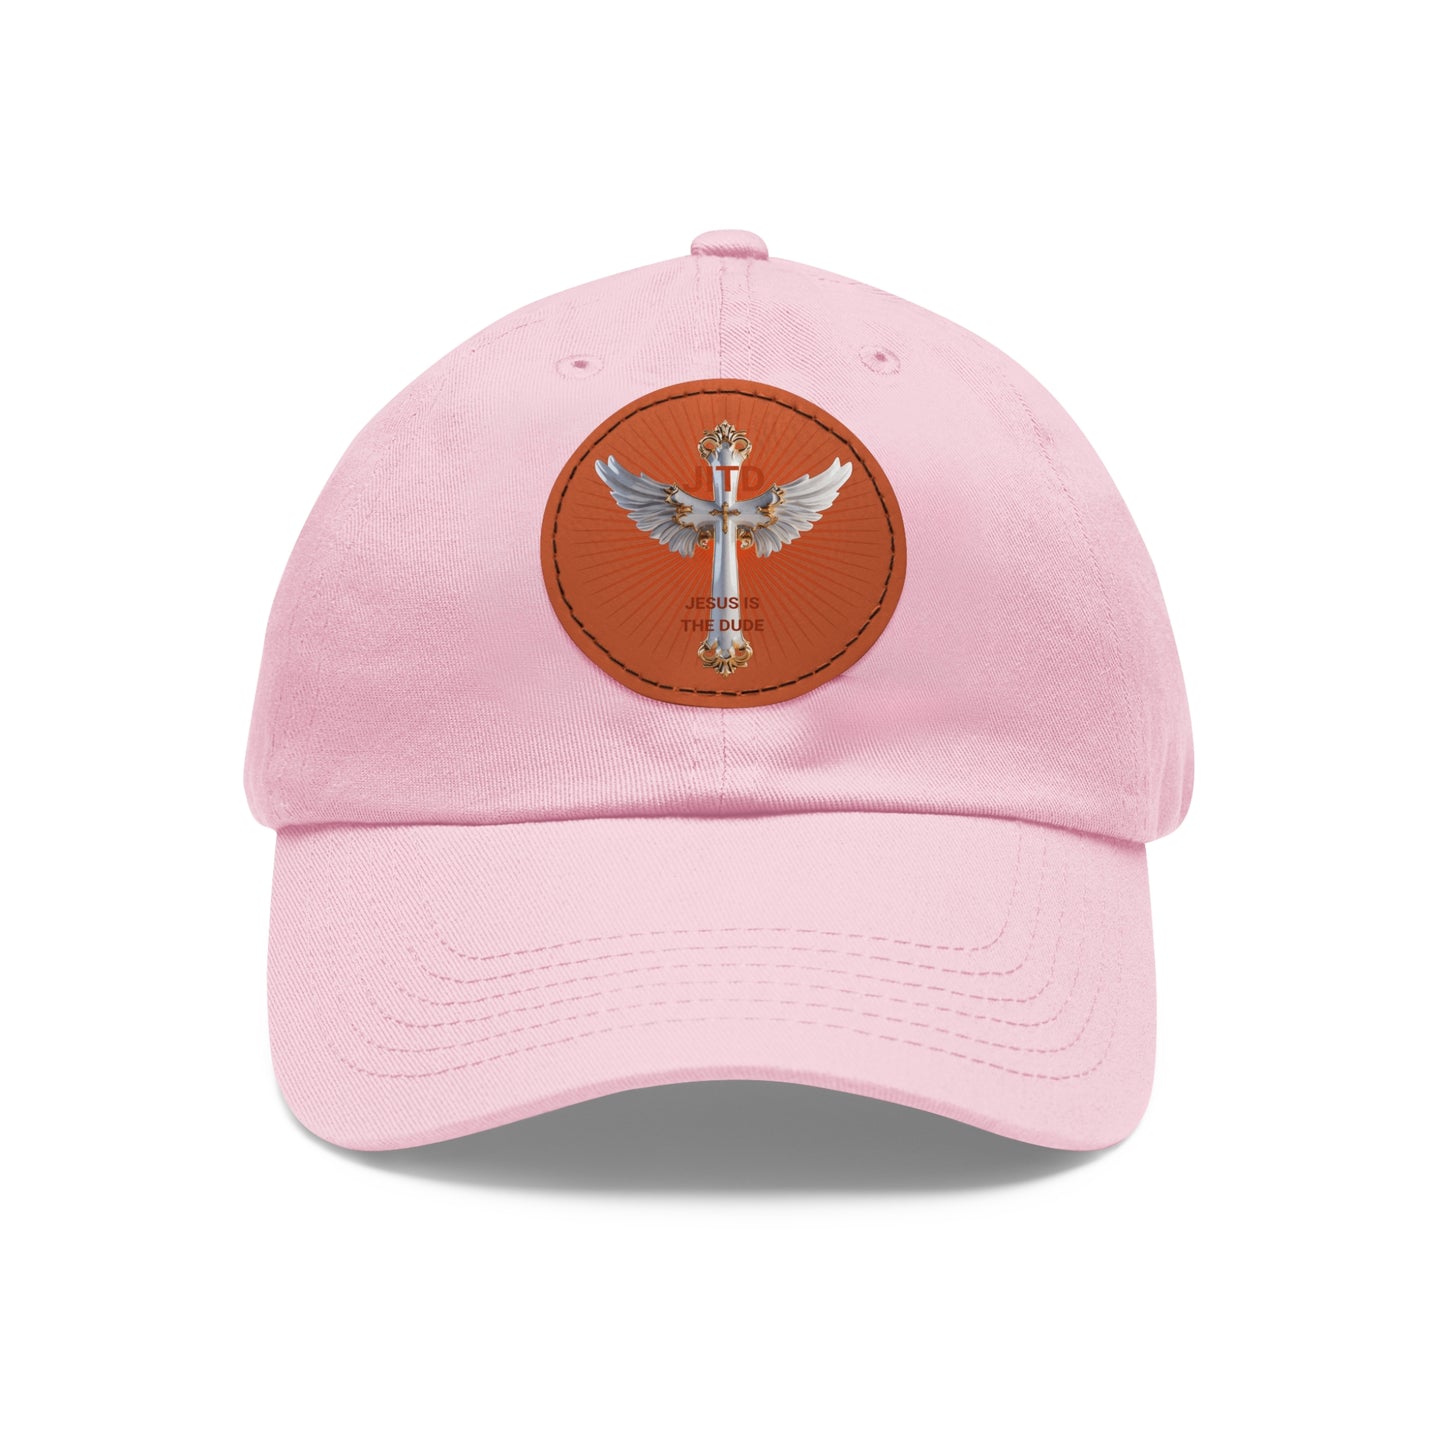 JITD WHITE WINGS CROSS HAT WITH LEATHER PATCH